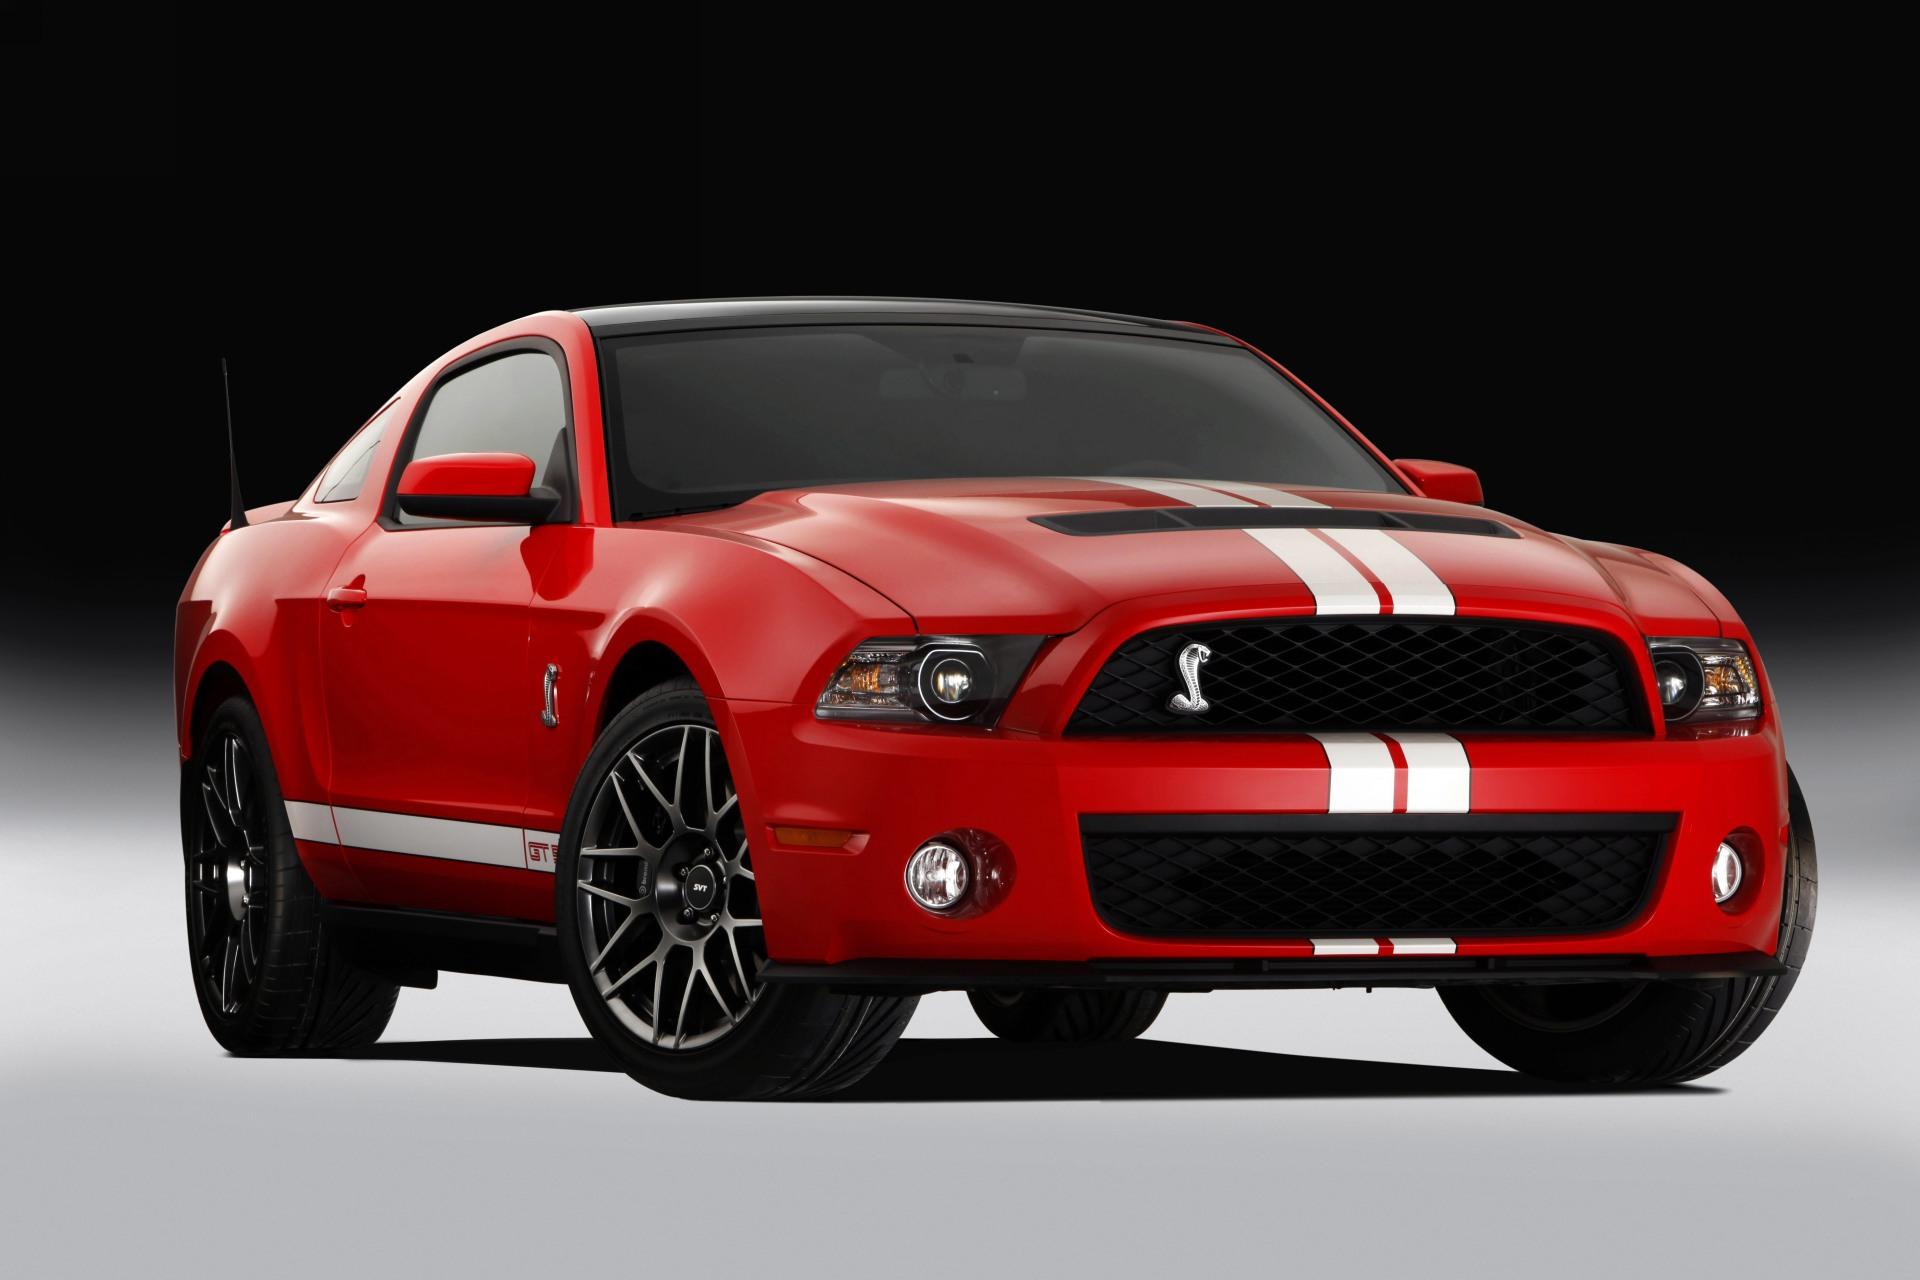 2011 Shelby Mustang GT500